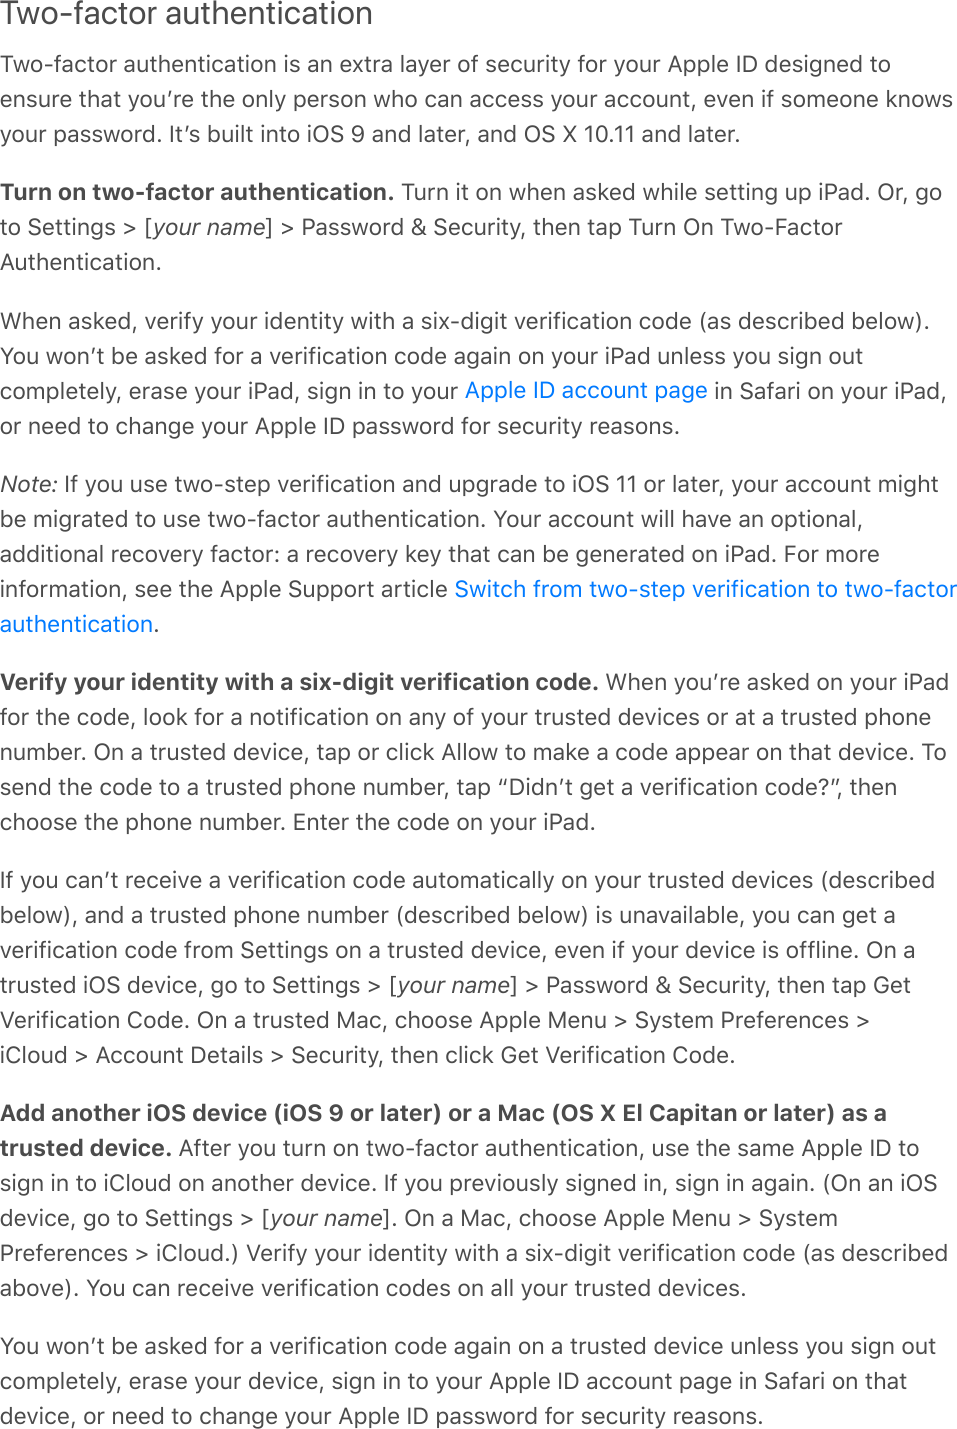 Two-factor authenticationTwo-factor authentication is an extra layer of security for your Apple ID designed toensure that youʼre the only person who can access your account, even if someone knowsyour password. Itʼs built into iOS 9 and later, and OS X 10.11 and later.Turn on two-factor authentication. Turn it on when asked while setting up iPad. Or, goto Settings &gt; [your name] &gt; Password &amp; Security, then tap Turn On Two-FactorAuthentication.When asked, verify your identity with a six-digit verification code (as described below).You wonʼt be asked for a verification code again on your iPad unless you sign outcompletely, erase your iPad, sign in to your   in Safari on your iPad,or need to change your Apple ID password for security reasons.Note: If you use two-step verification and upgrade to iOS 11 or later, your account mightbe migrated to use two-factor authentication. Your account will have an optional,additional recovery factor: a recovery key that can be generated on iPad. For moreinformation, see the Apple Support article .Verify your identity with a six-digit verification code. When youʼre asked on your iPadfor the code, look for a notification on any of your trusted devices or at a trusted phonenumber. On a trusted device, tap or click Allow to make a code appear on that device. Tosend the code to a trusted phone number, tap “Didnʼt get a verification code?”, thenchoose the phone number. Enter the code on your iPad.If you canʼt receive a verification code automatically on your trusted devices (describedbelow), and a trusted phone number (described below) is unavailable, you can get averification code from Settings on a trusted device, even if your device is offline. On atrusted iOS device, go to Settings &gt; [your name] &gt; Password &amp; Security, then tap GetVerification Code. On a trusted Mac, choose Apple Menu &gt; System Preferences &gt;iCloud &gt; Account Details &gt; Security, then click Get Verification Code.Add another iOS device (iOS 9 or later) or a Mac (OS X El Capitan or later) as atrusted device. After you turn on two-factor authentication, use the same Apple ID tosign in to iCloud on another device. If you previously signed in, sign in again. (On an iOSdevice, go to Settings &gt; [your name]. On a Mac, choose Apple Menu &gt; SystemPreferences &gt; iCloud.) Verify your identity with a six-digit verification code (as describedabove). You can receive verification codes on all your trusted devices.You wonʼt be asked for a verification code again on a trusted device unless you sign outcompletely, erase your device, sign in to your Apple ID account page in Safari on thatdevice, or need to change your Apple ID password for security reasons.Apple ID account pageSwitch from two-step verification to two-factorauthentication